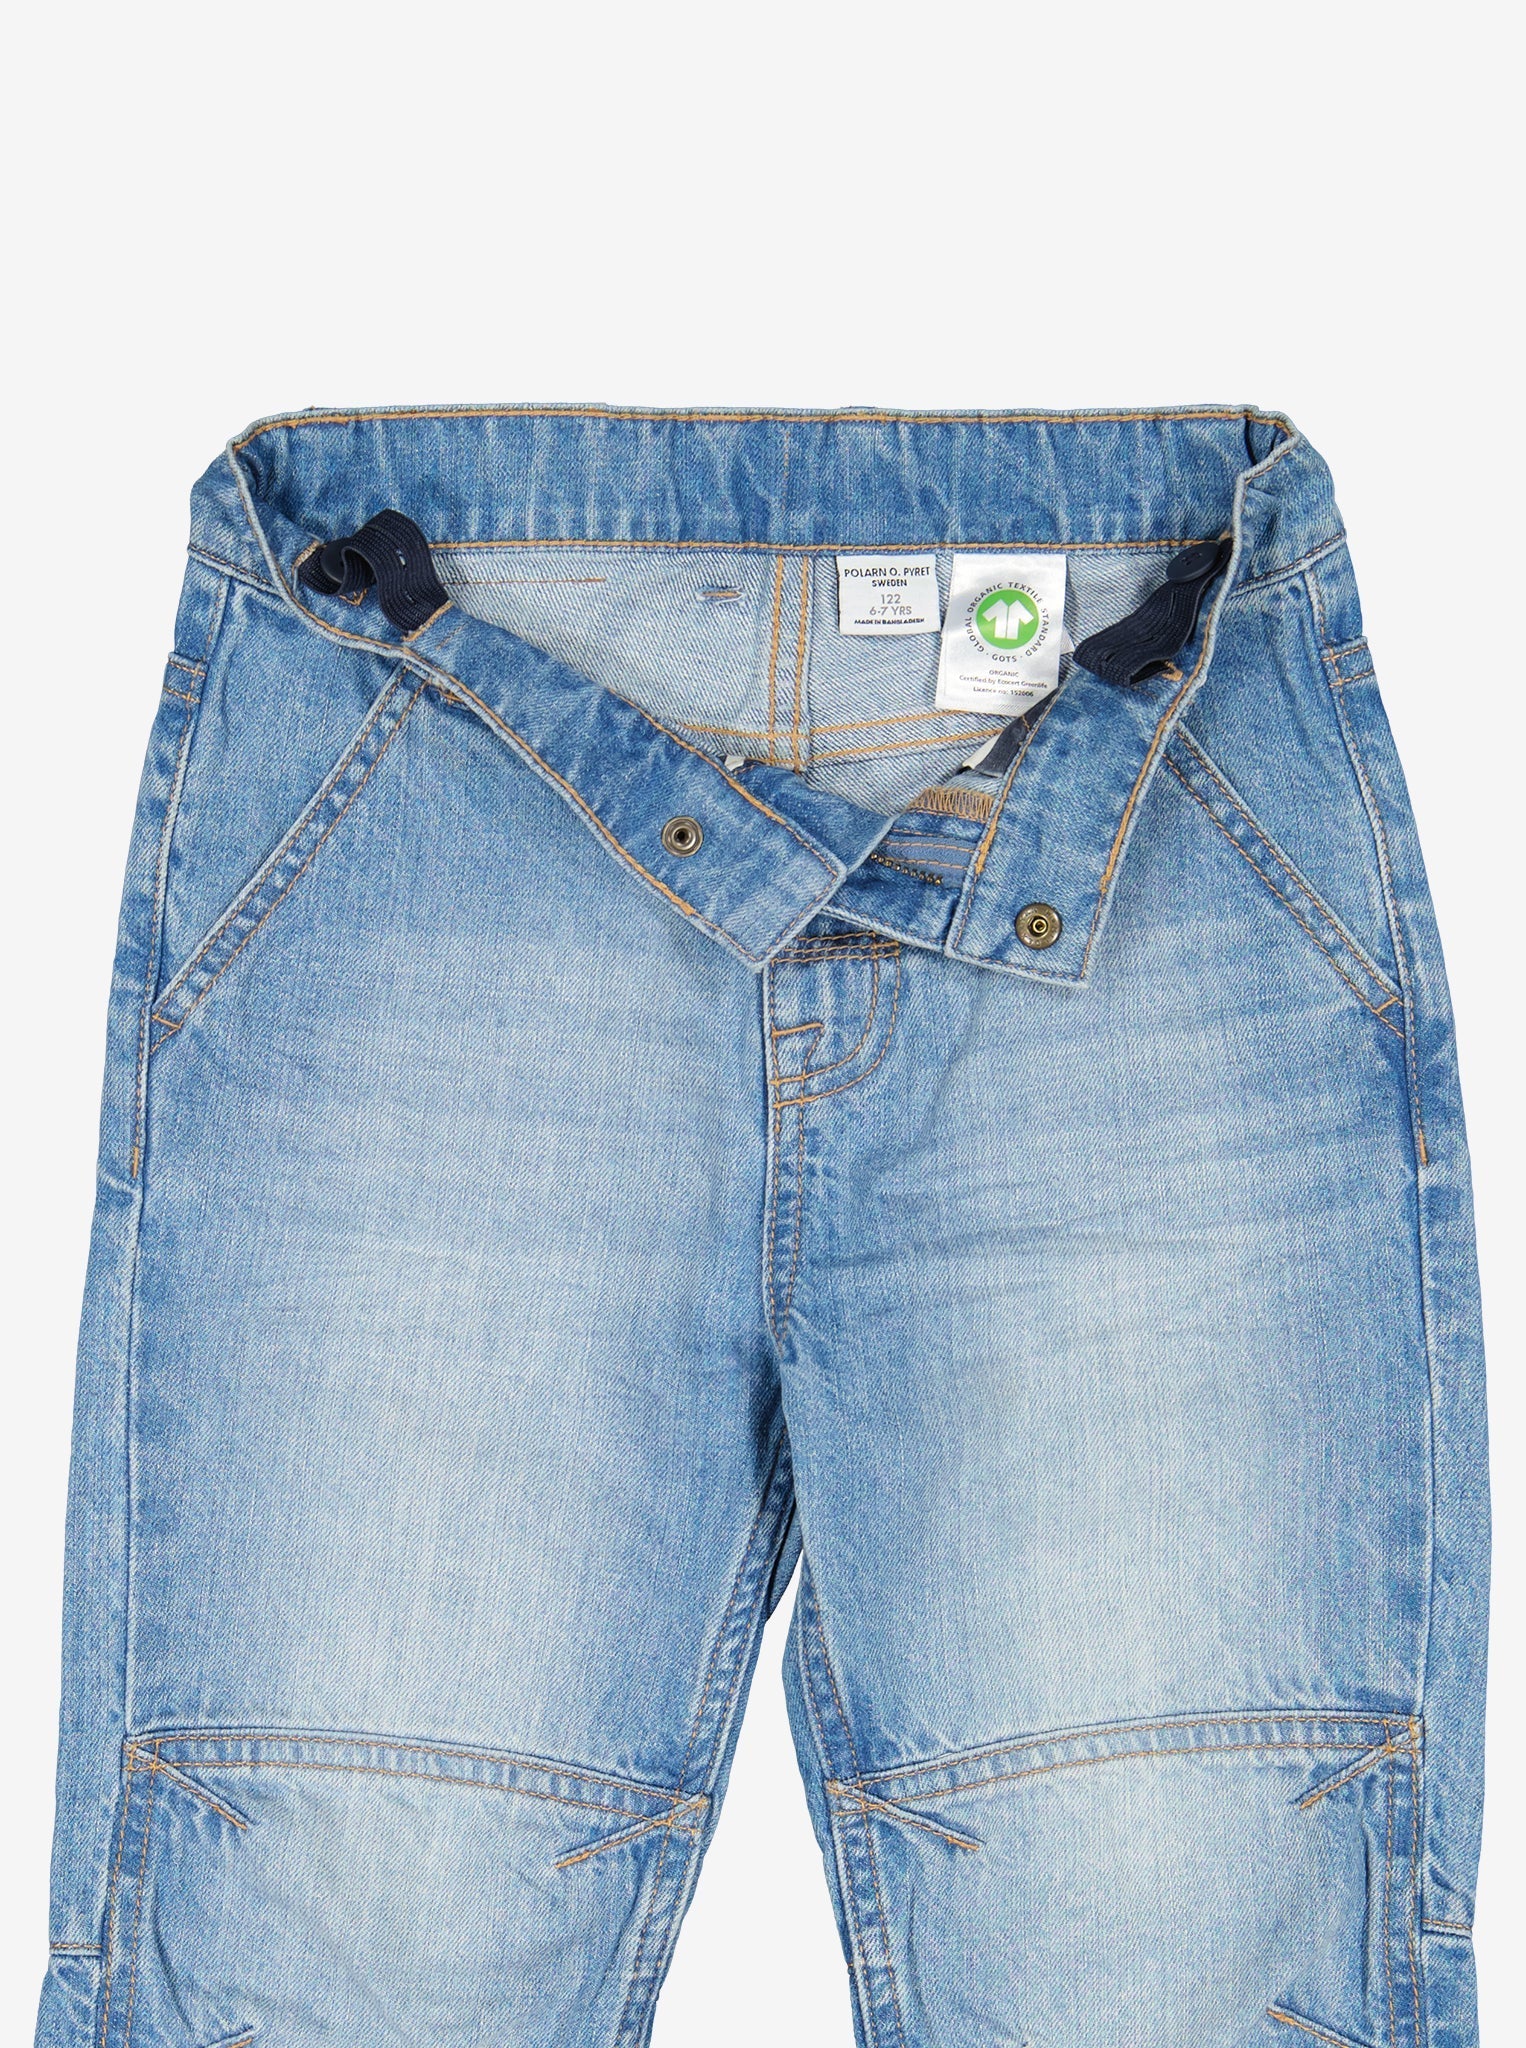  Blue Denim Kids Shorts from Polarn O. Pyret Kidswear. Made using ethically sourced materials.